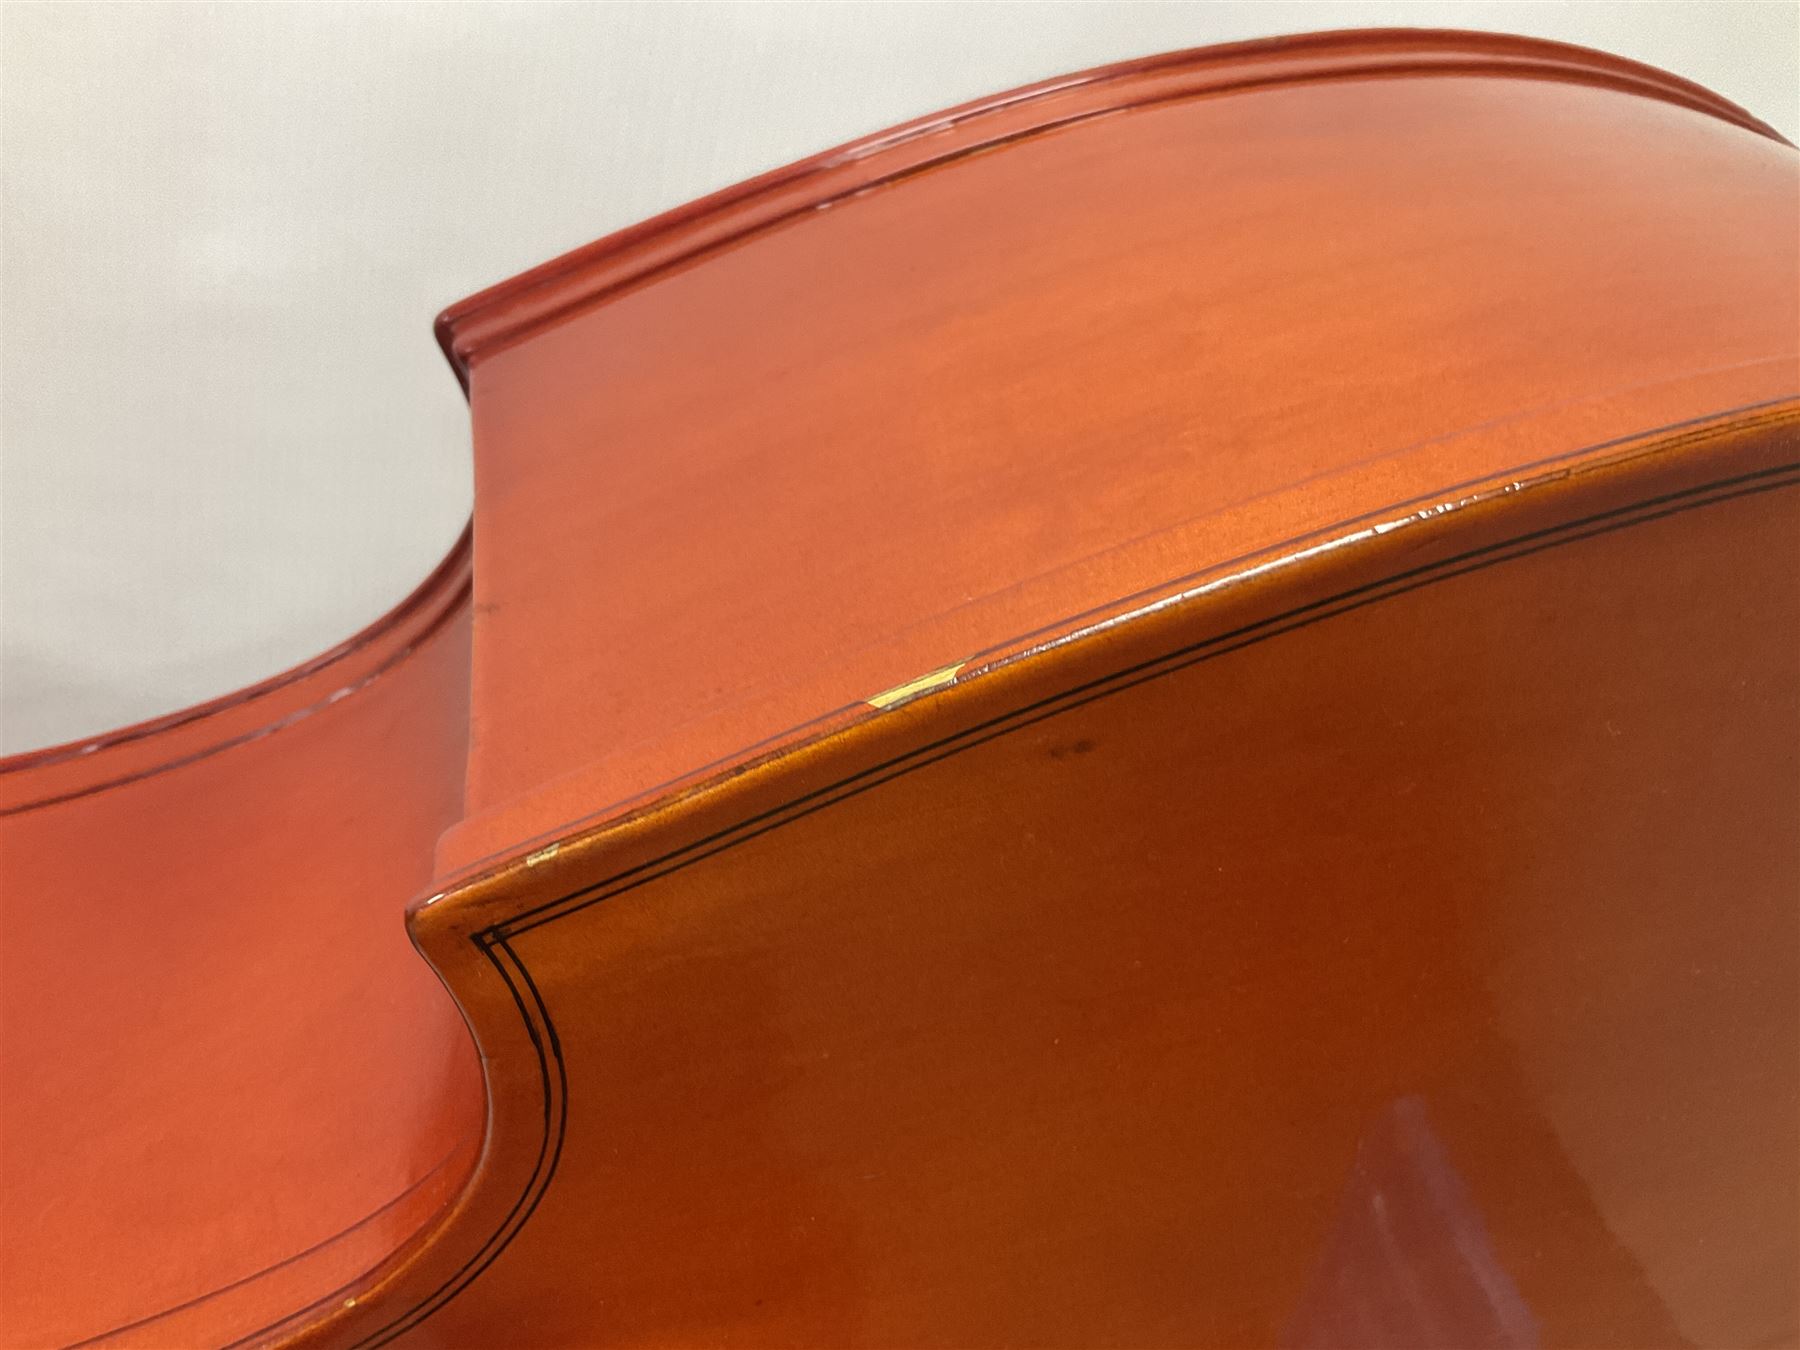 Contemporary 3/4 Double Bass - Image 12 of 18